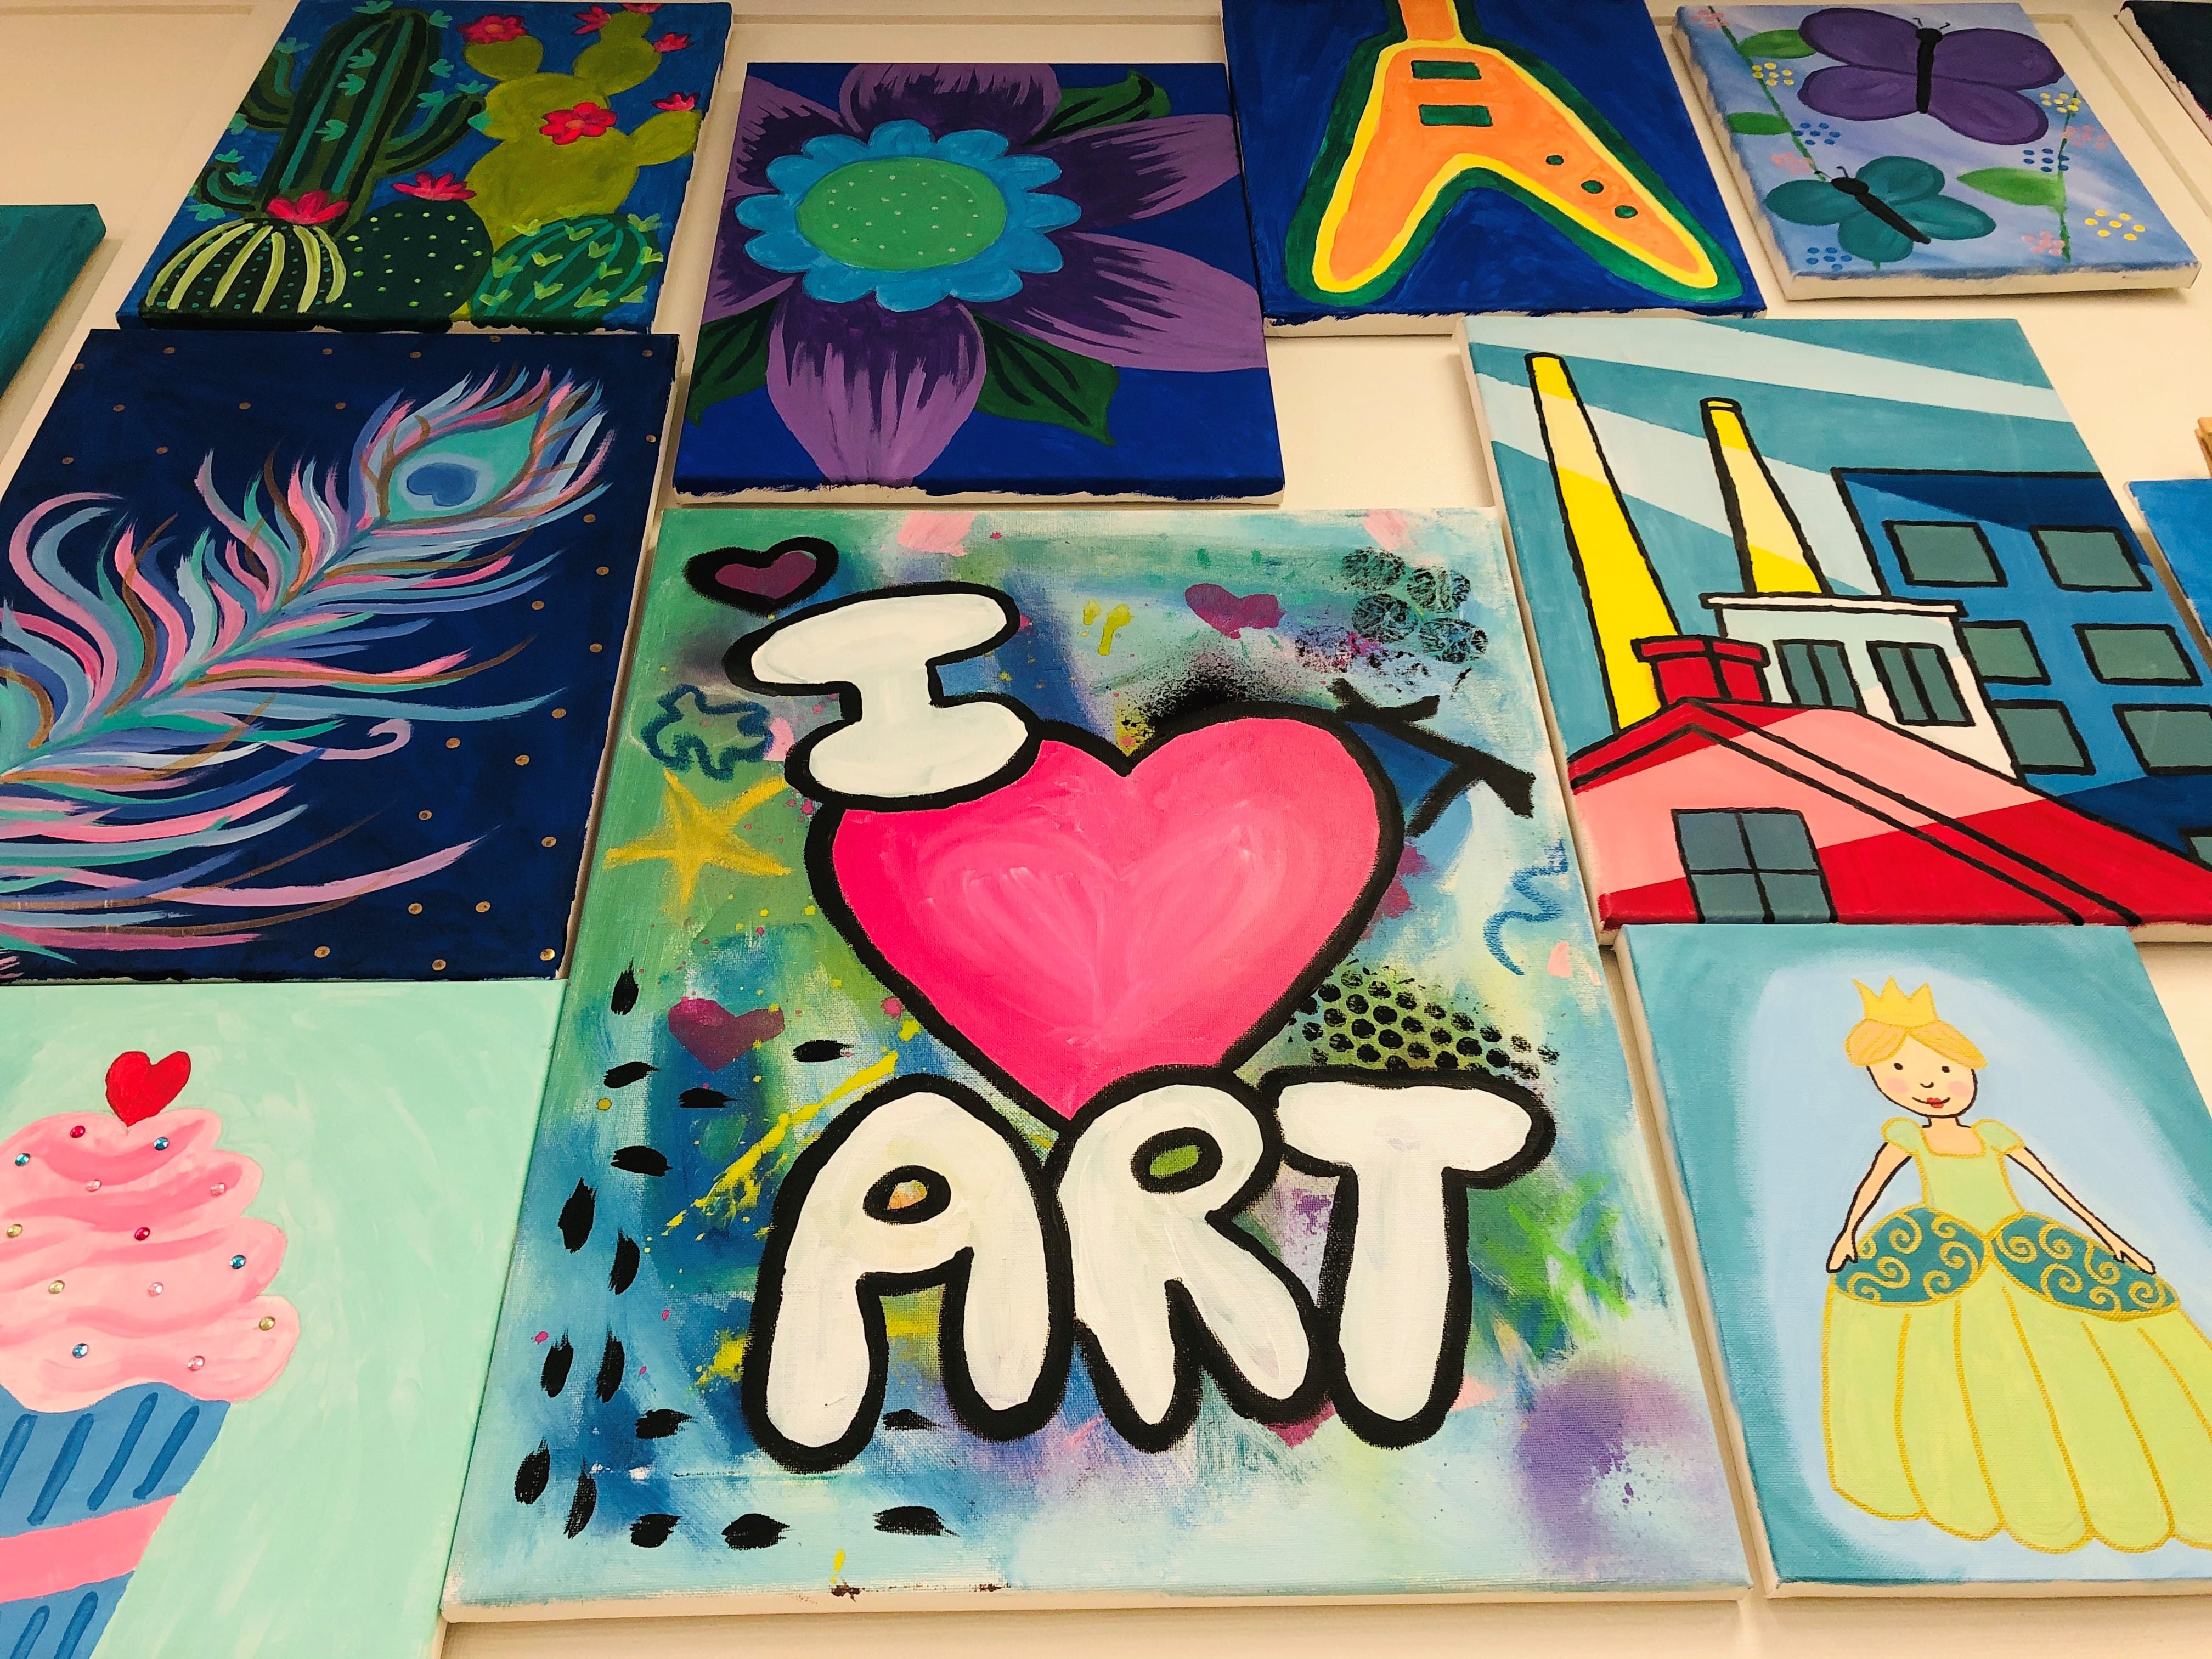 image of colorful abstract painted canvases featuring one with I heart art in the middle of the image